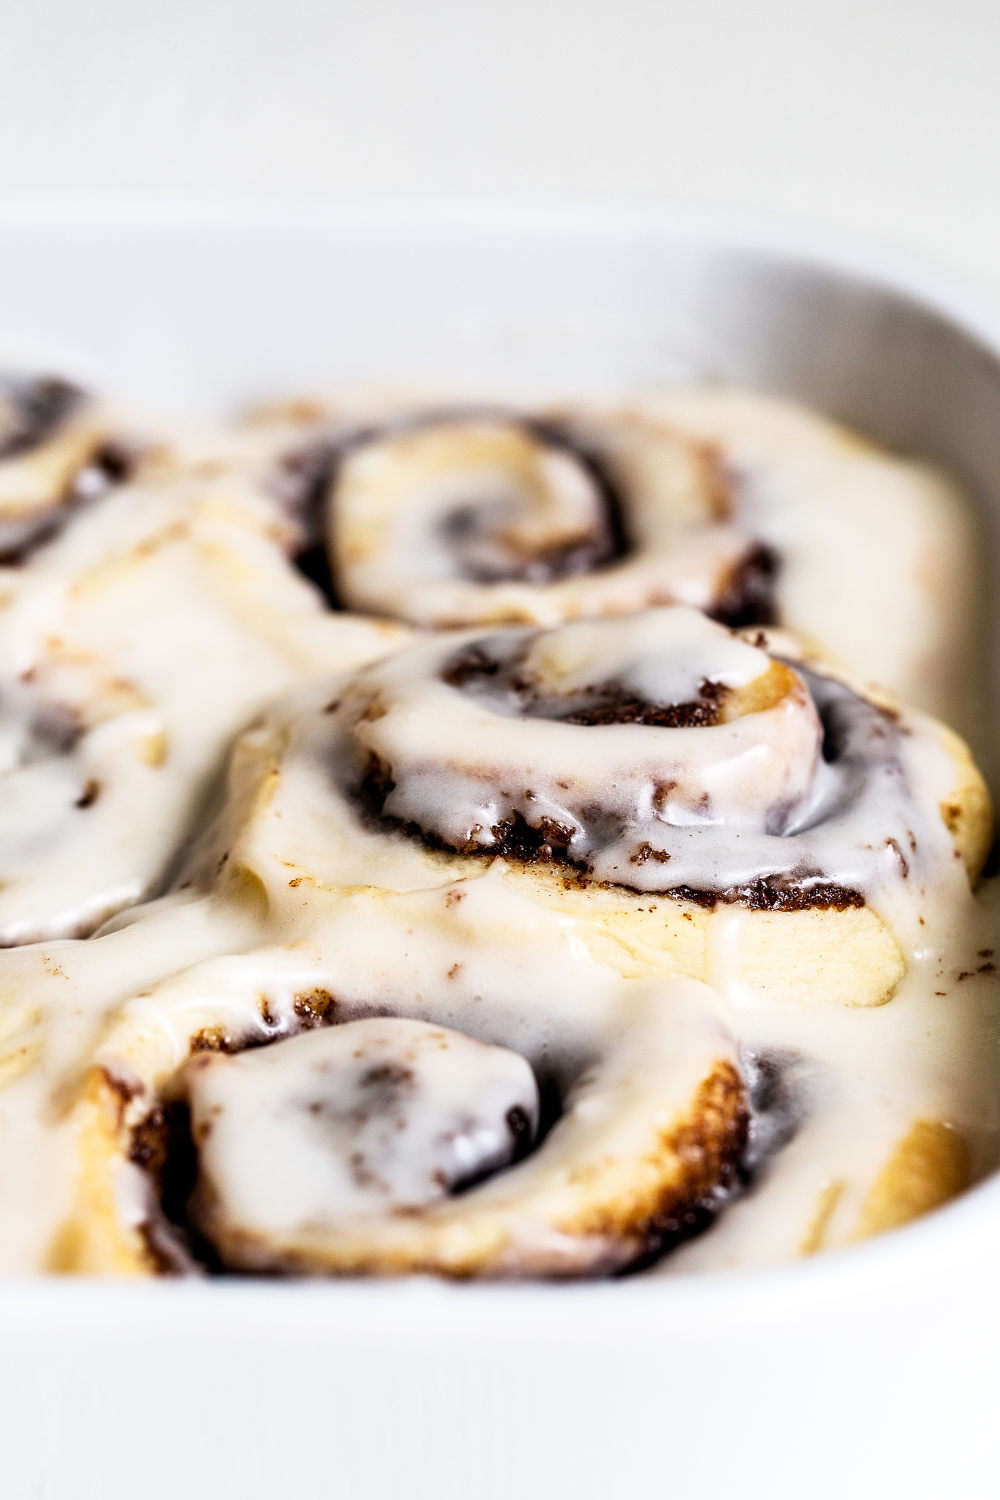 gooey cinnamon rolls in their baking pan, covered in white icing, ready for serving.